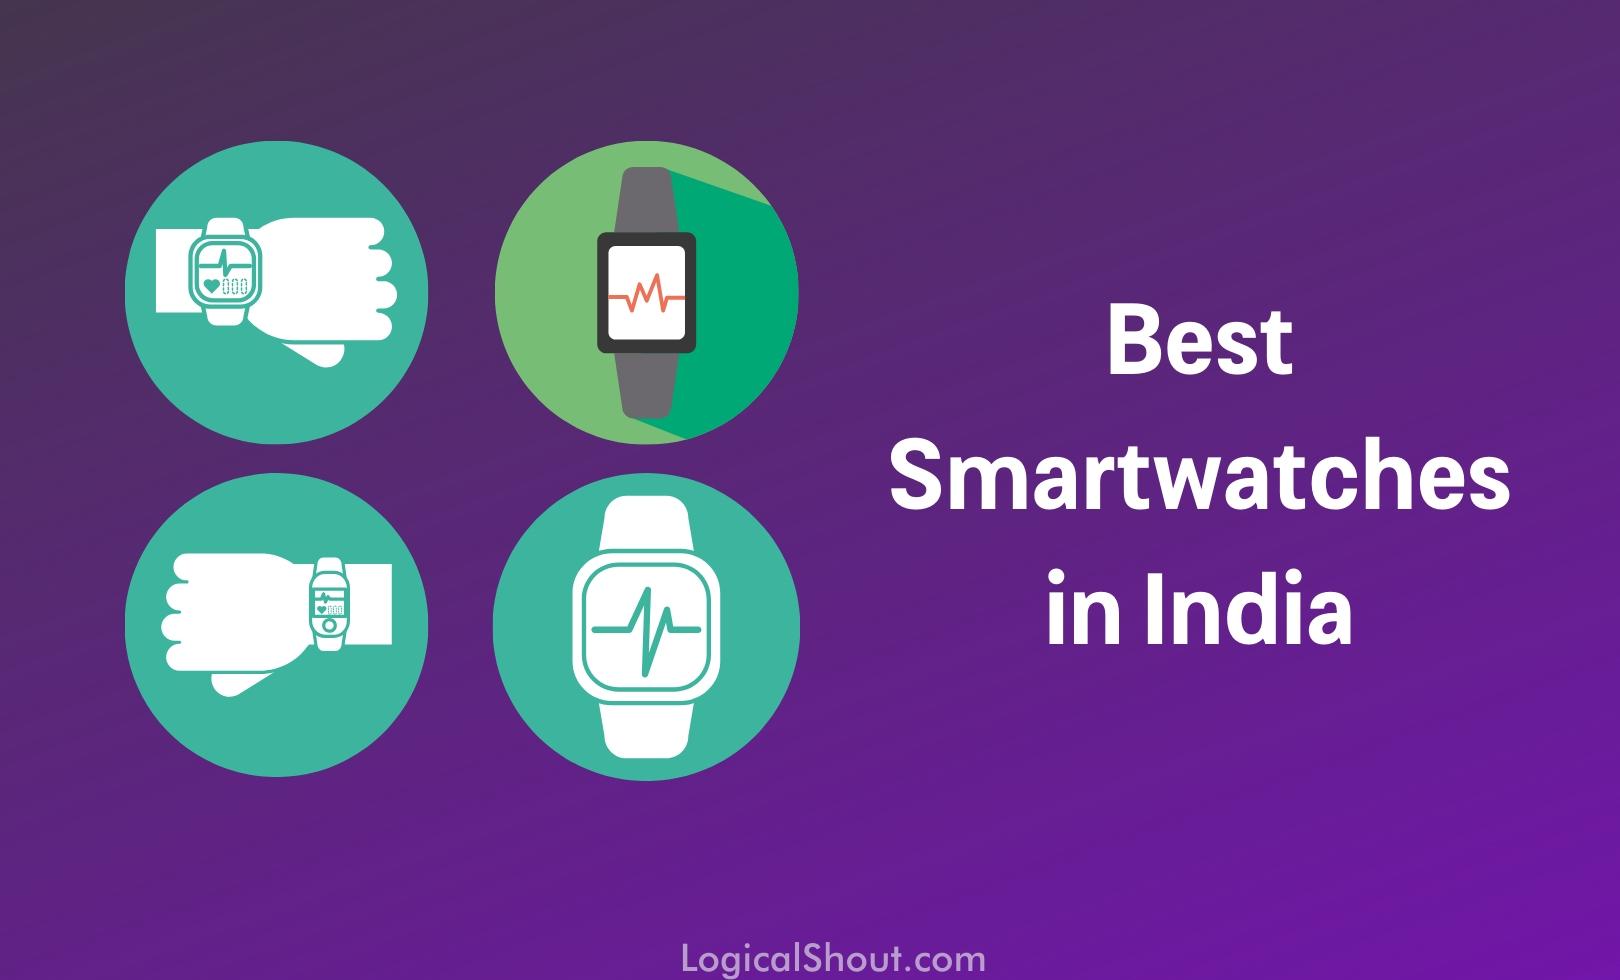 Best Smartwatches In India